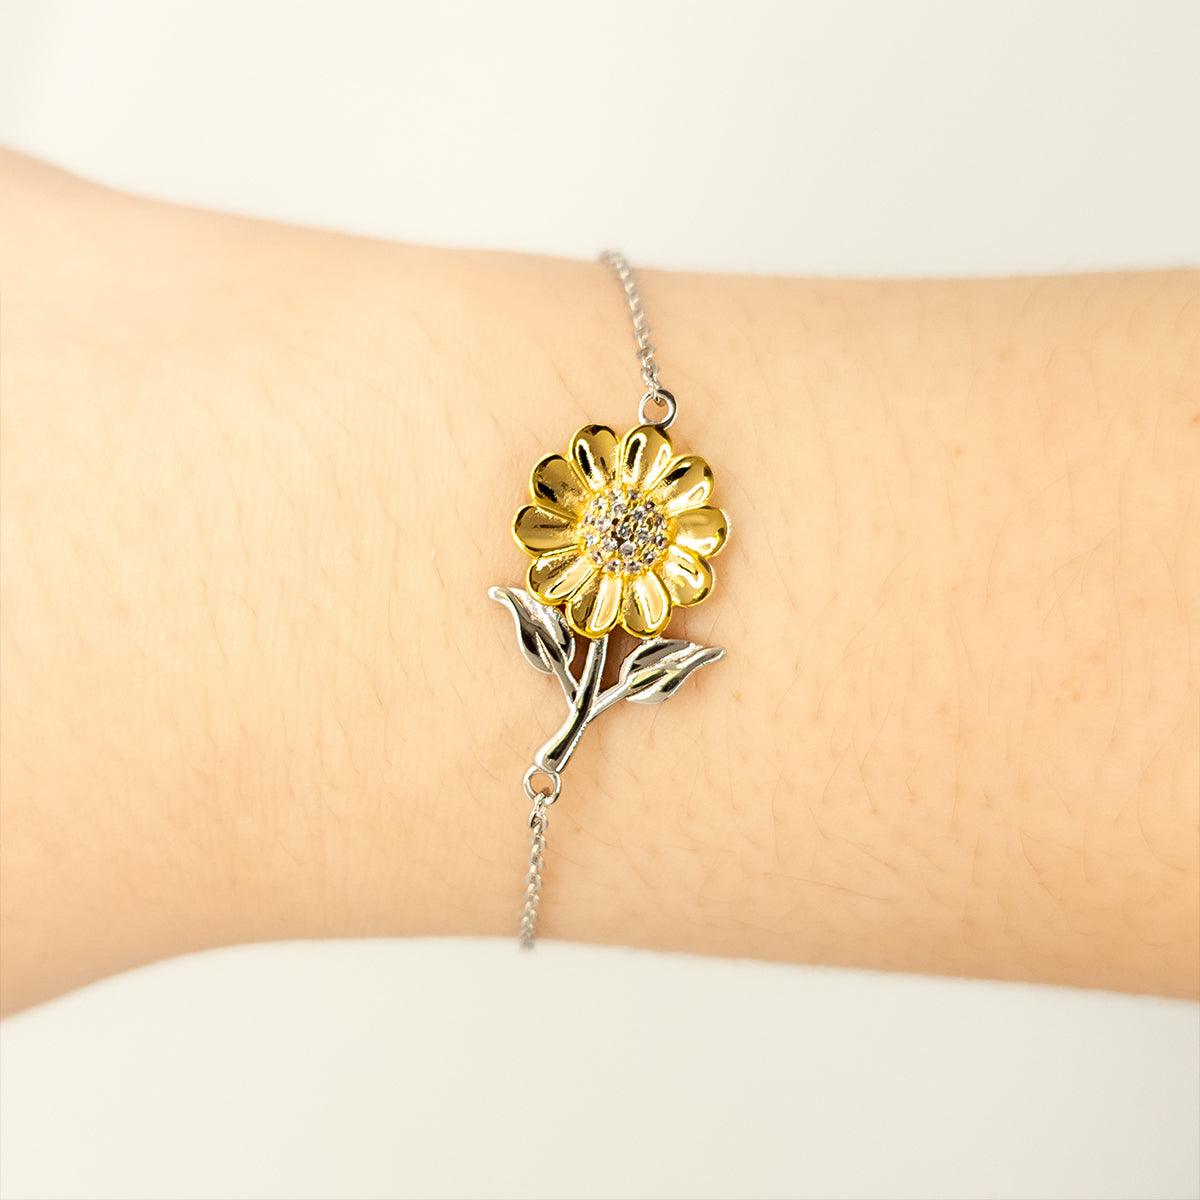 Remarkable Mail Carrier Gifts, Your dedication and hard work, Inspirational Birthday Christmas Unique Sunflower Bracelet For Mail Carrier, Coworkers, Men, Women, Friends - Mallard Moon Gift Shop